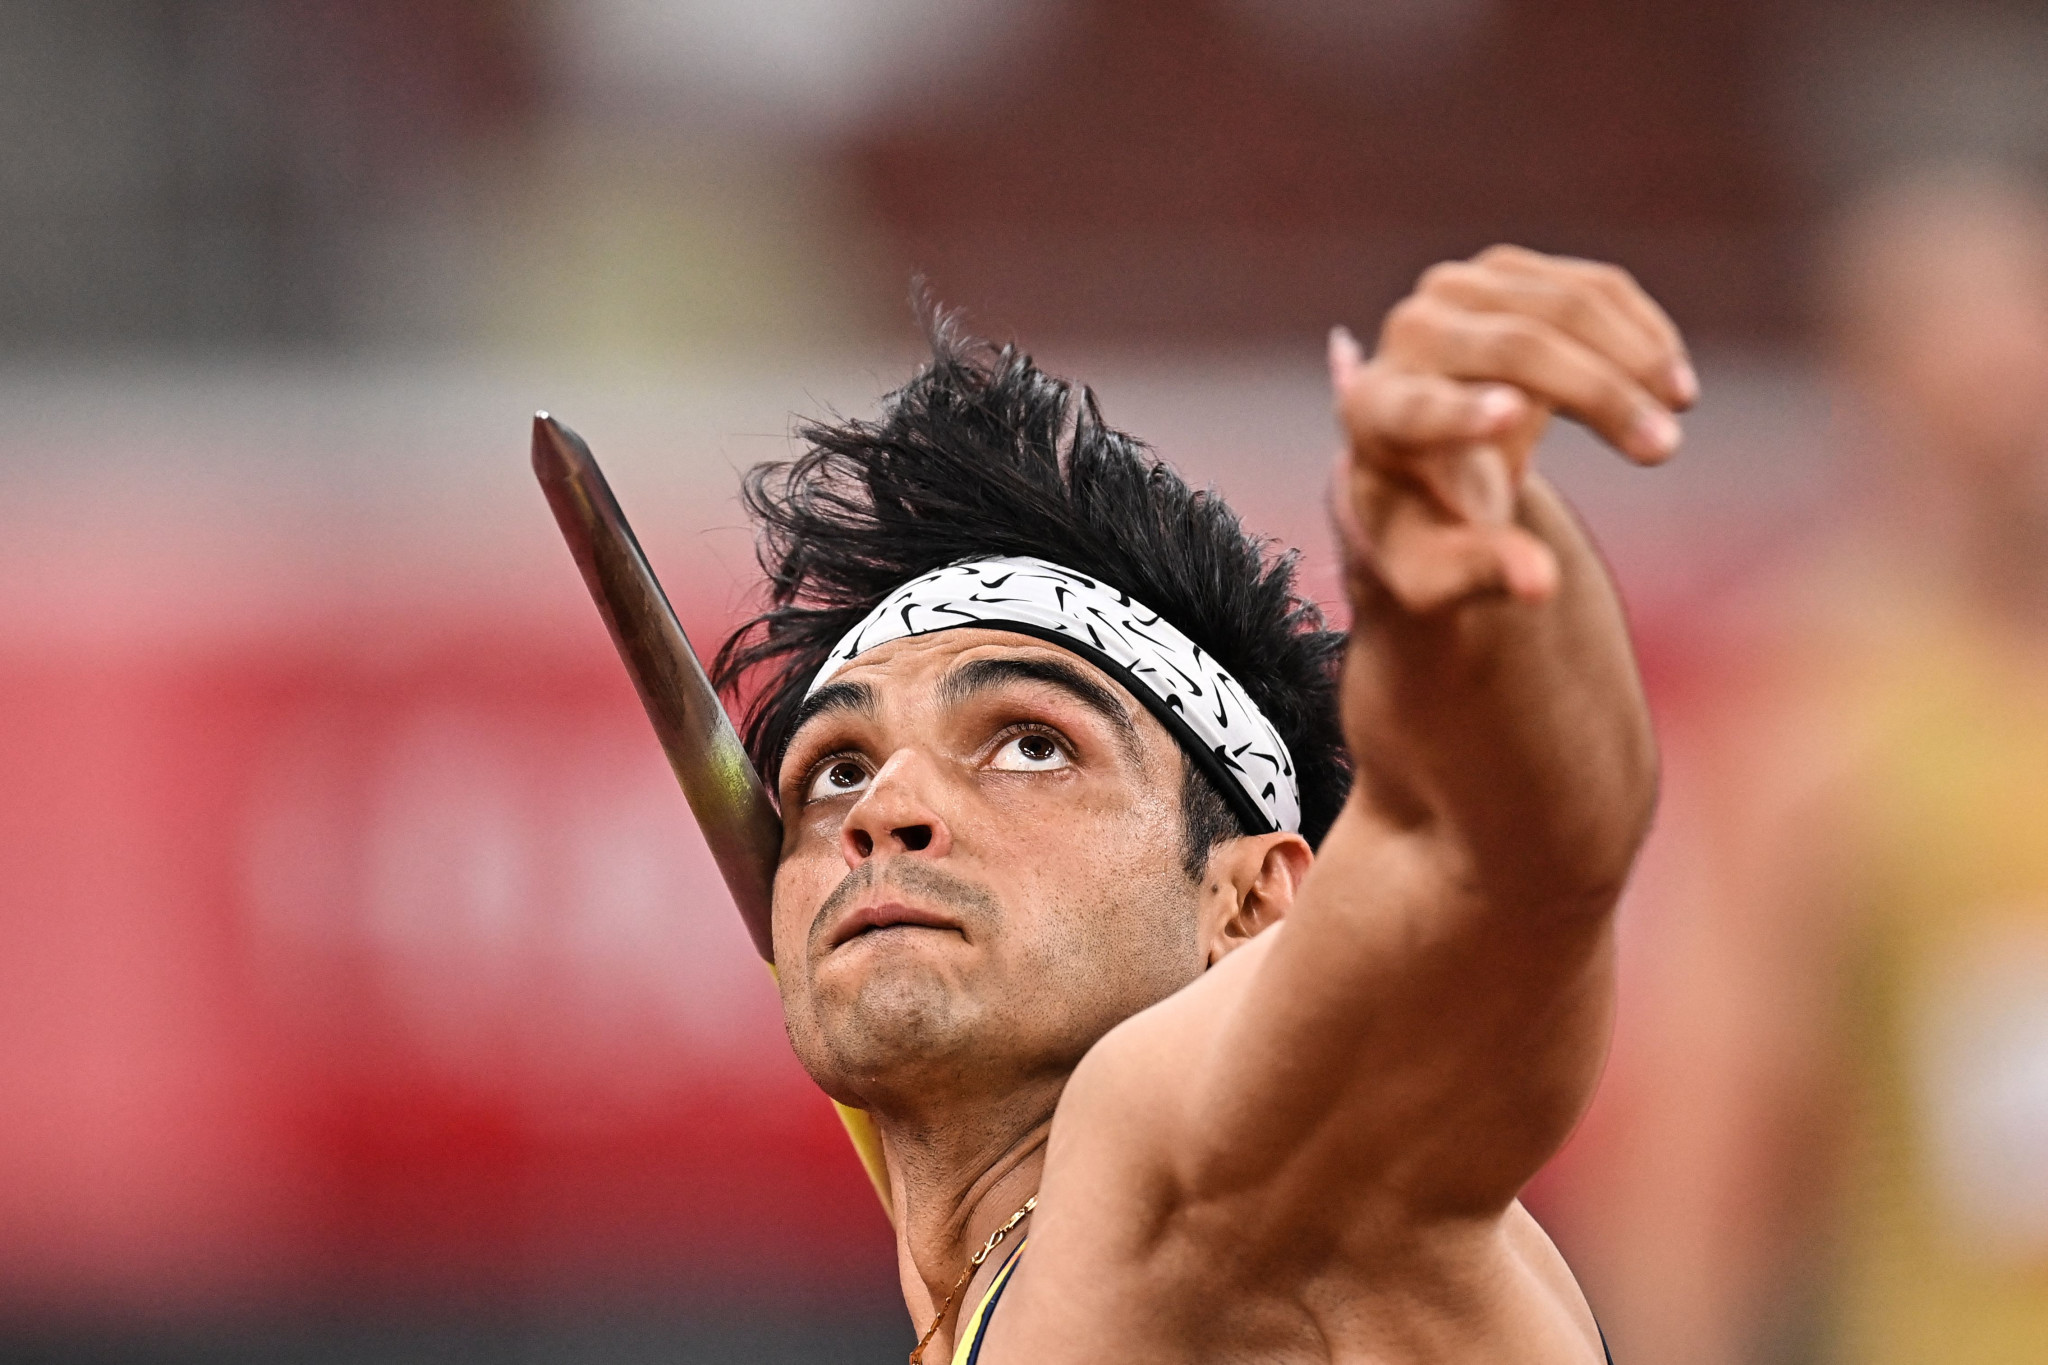 Neeraj Chopra added Olympic gold at Tokyo 2020 to his Gold Coast 2018 Commonwealth title ©Getty Images